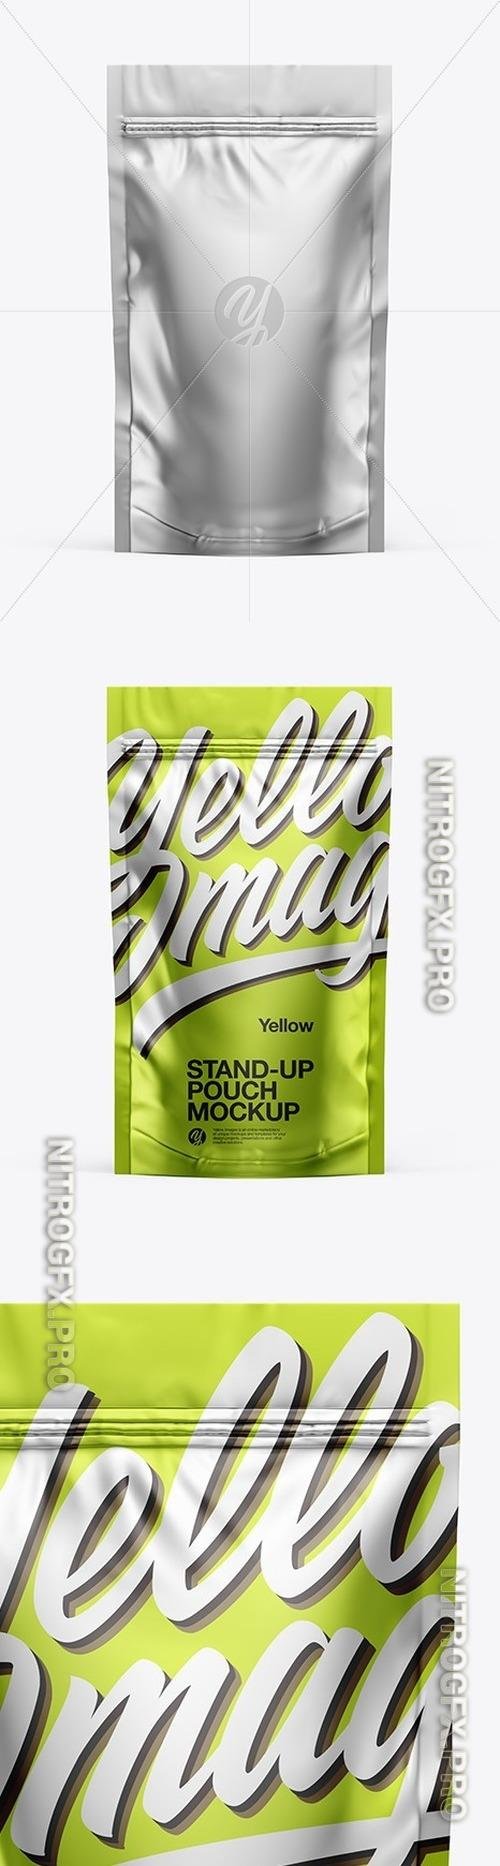 Metallic Stand-Up Pouch Mockup 49979